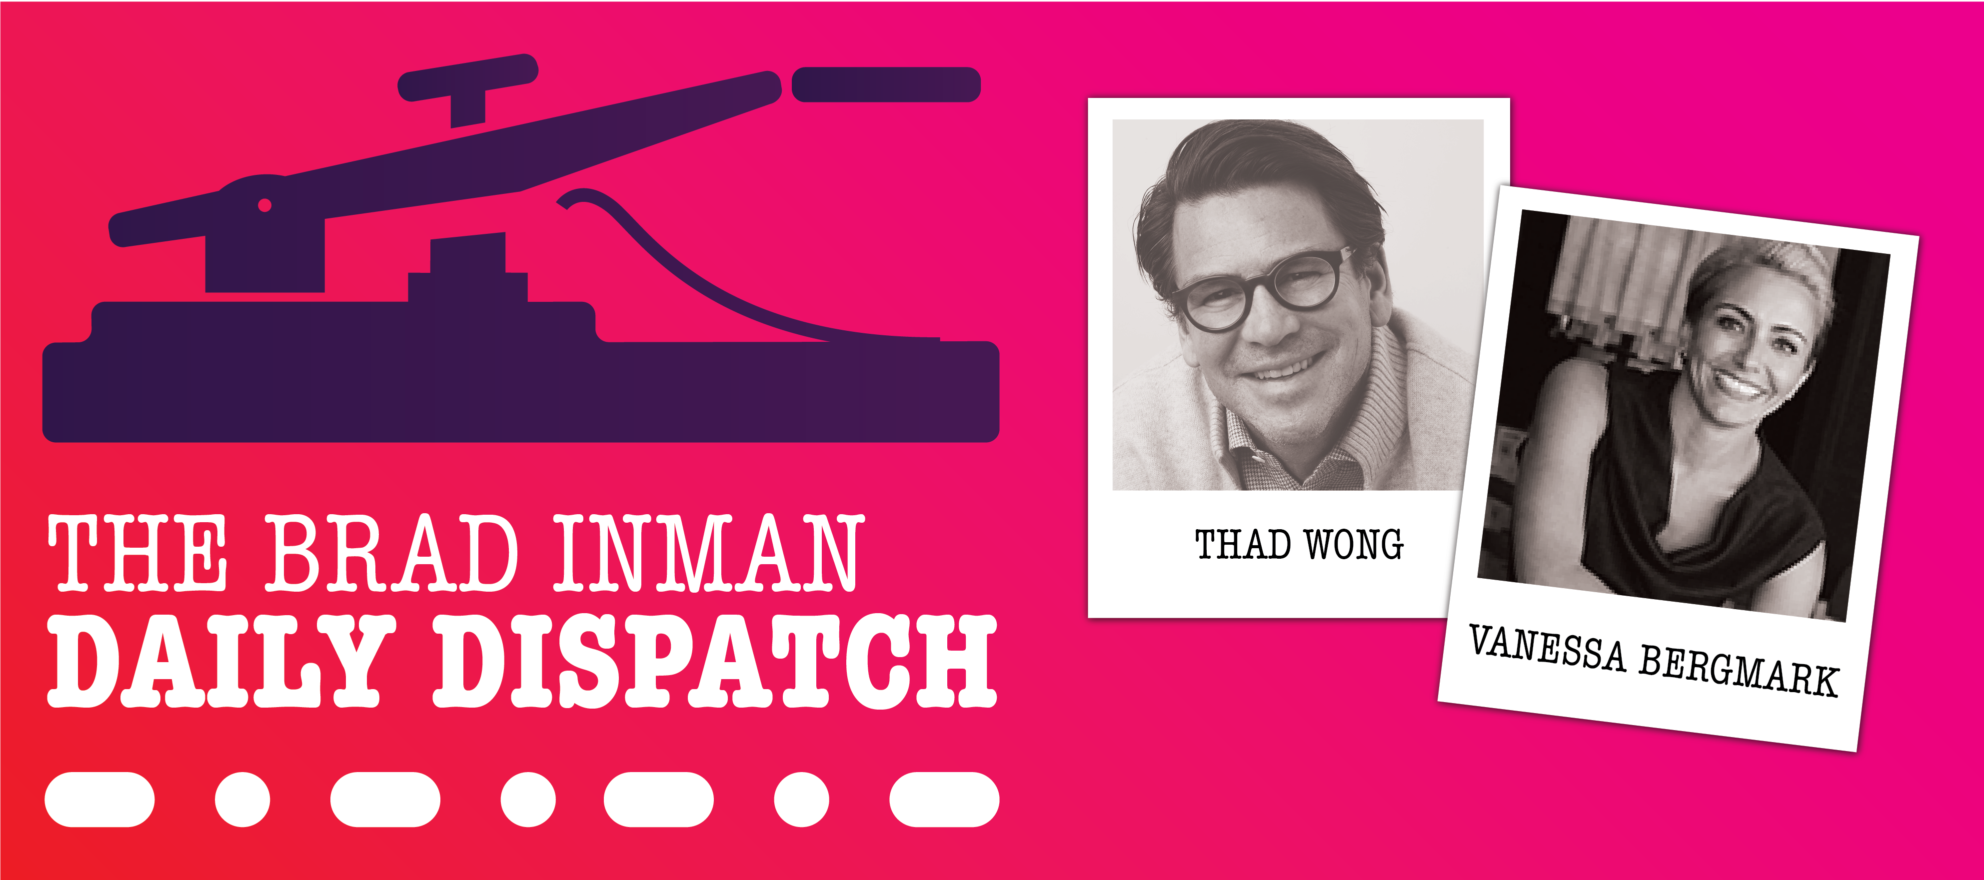 Daily Dispatch: Brad Inman with Vanessa Bergmark and Thad Wong